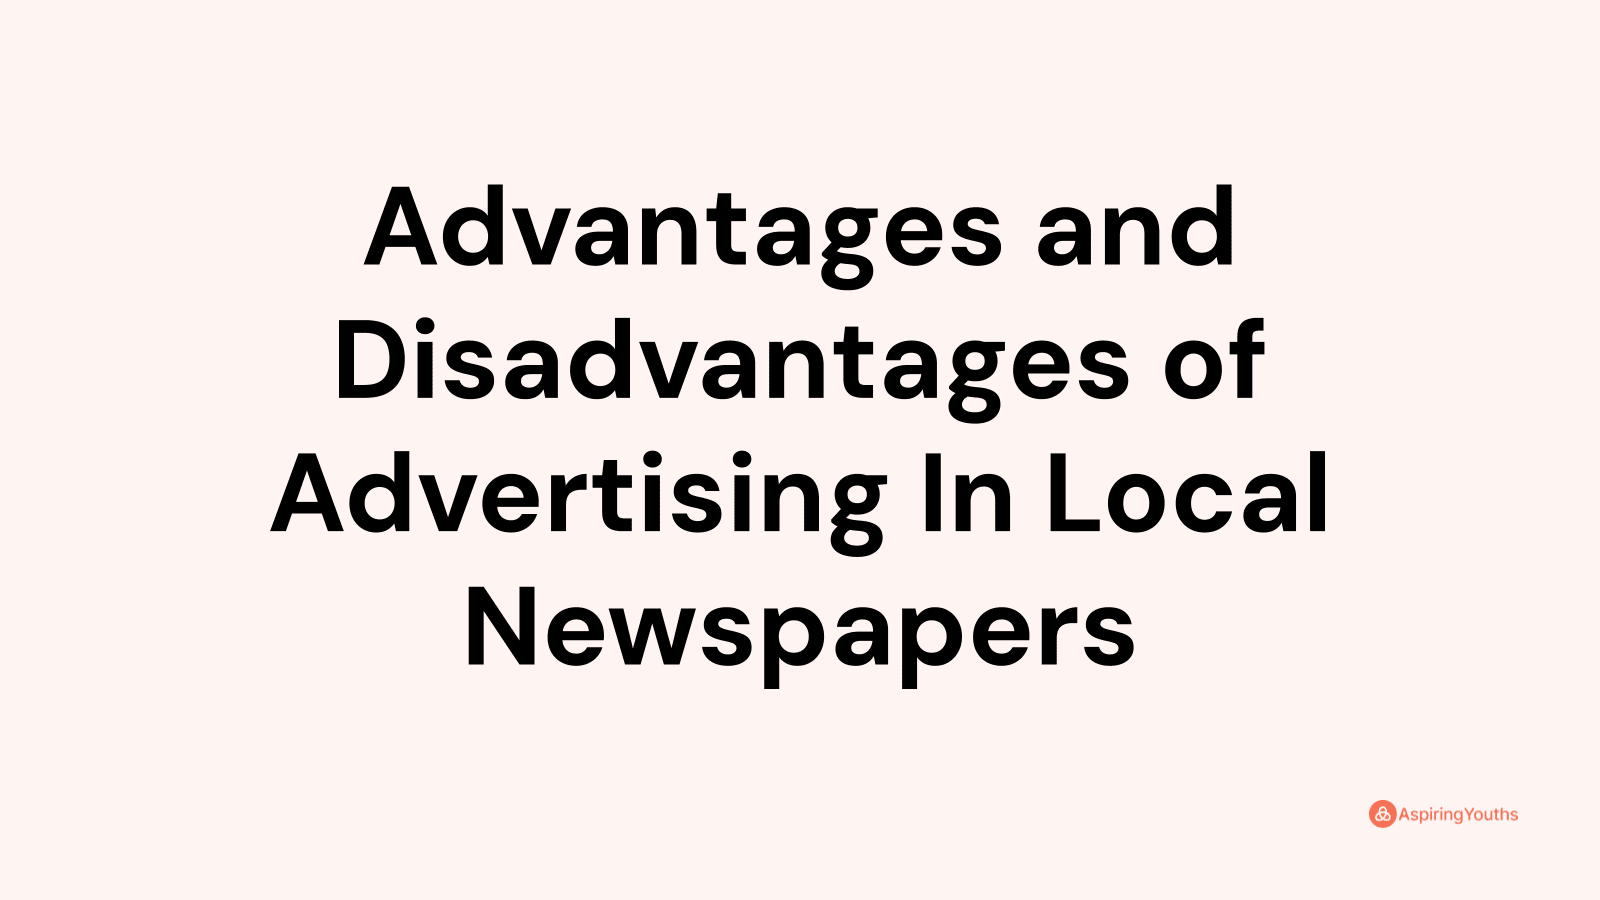 Advantages and disadvantages of Advertising In Local Newspapers